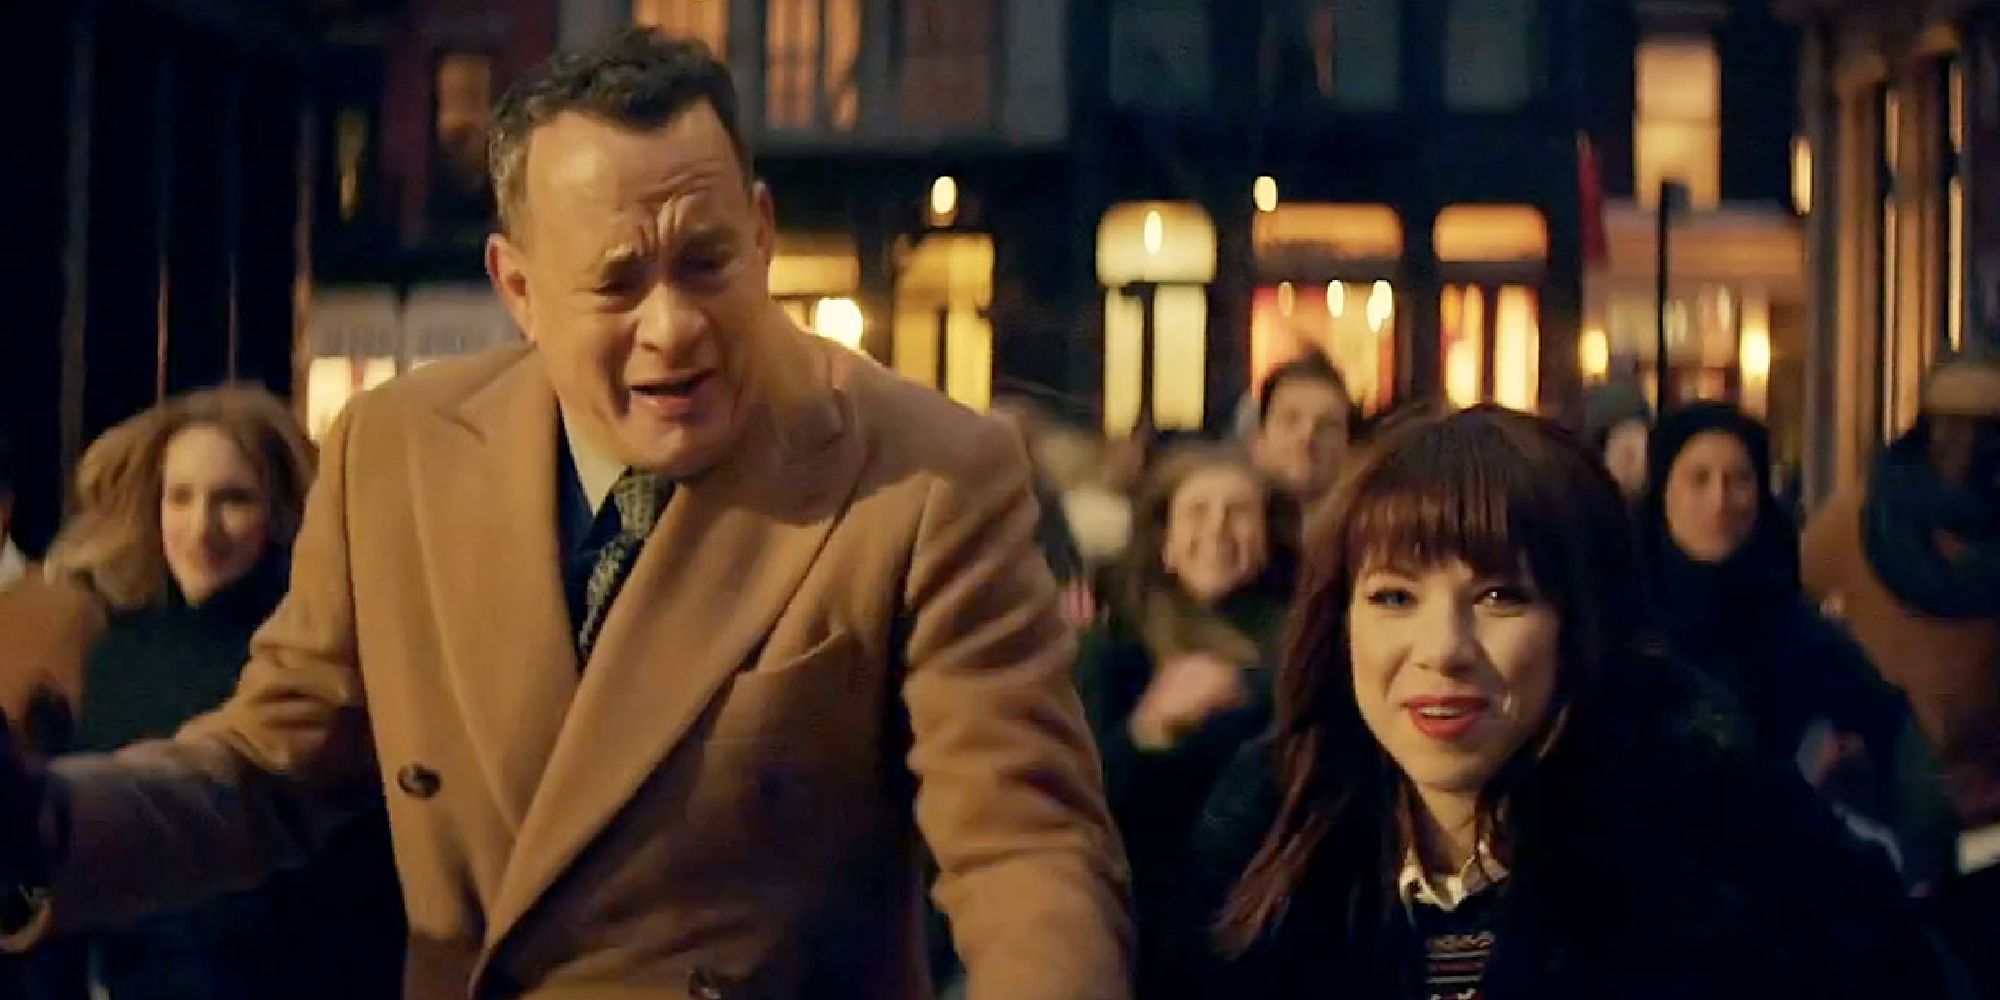 Tom Hanks and Carly Rae Jepsen dancing in the "I Really Like You" video